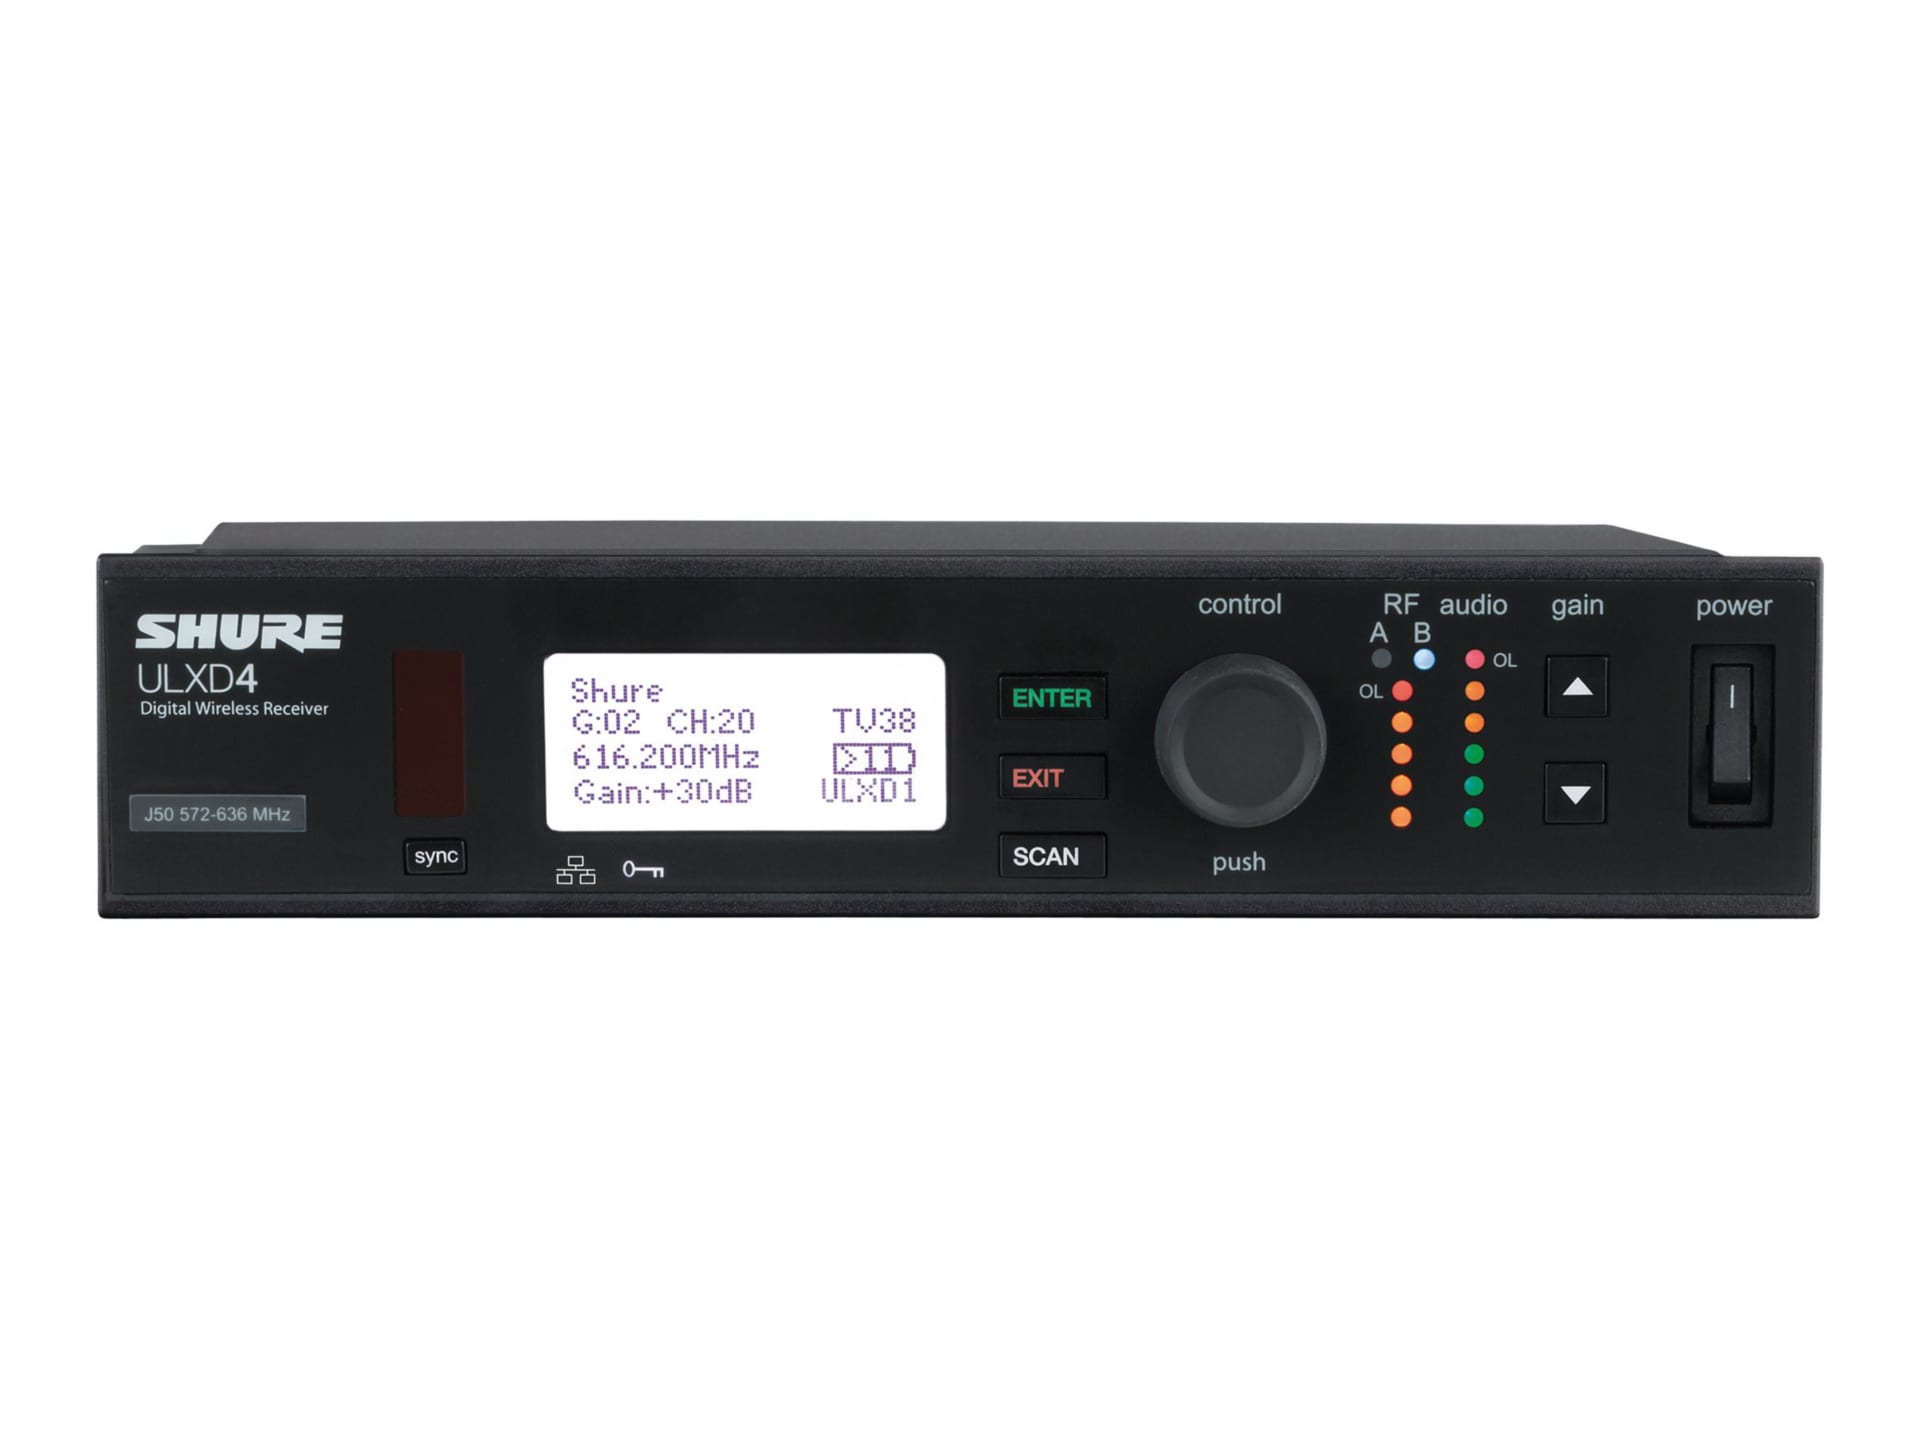 Shure ULXD4 - wireless audio receiver for wireless microphone system